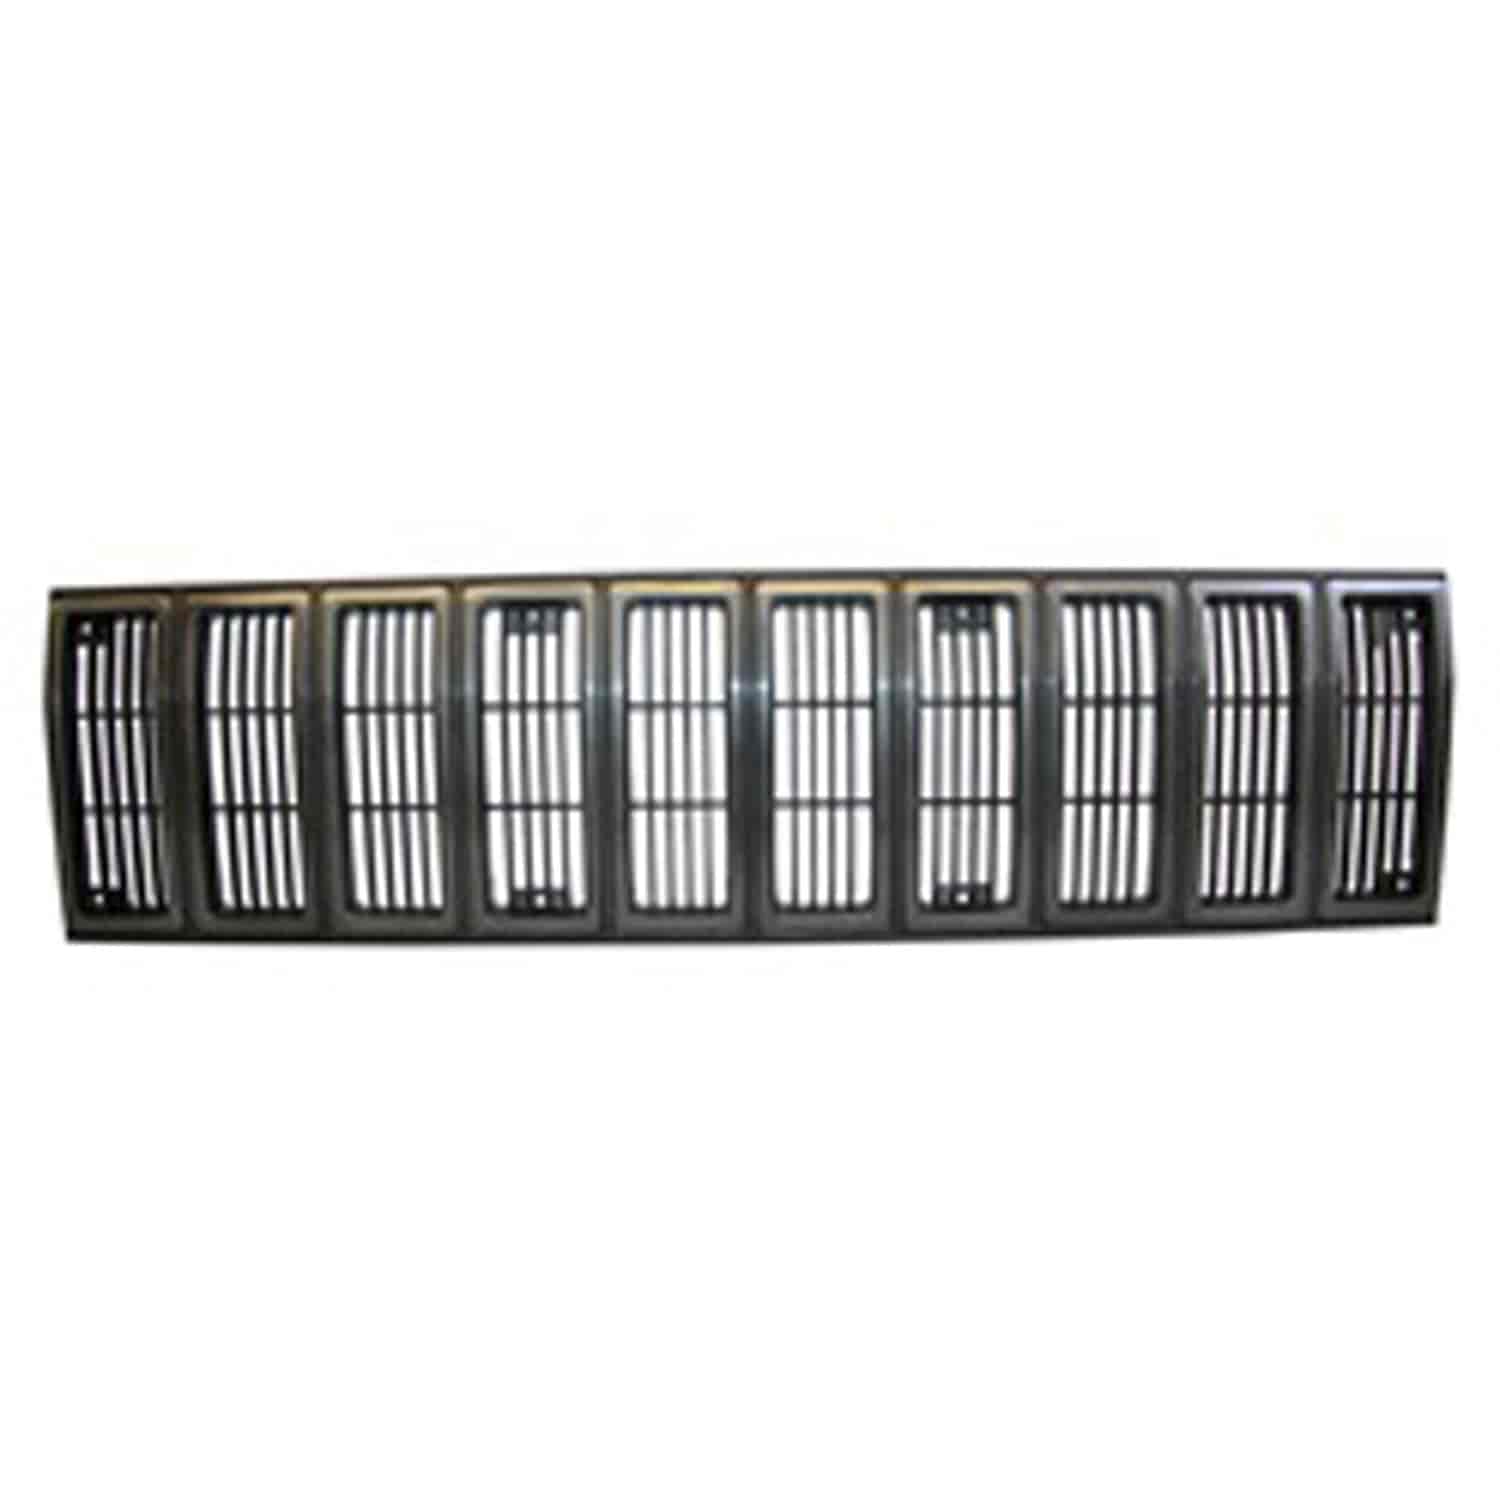 This black grille insert with a paintable accent